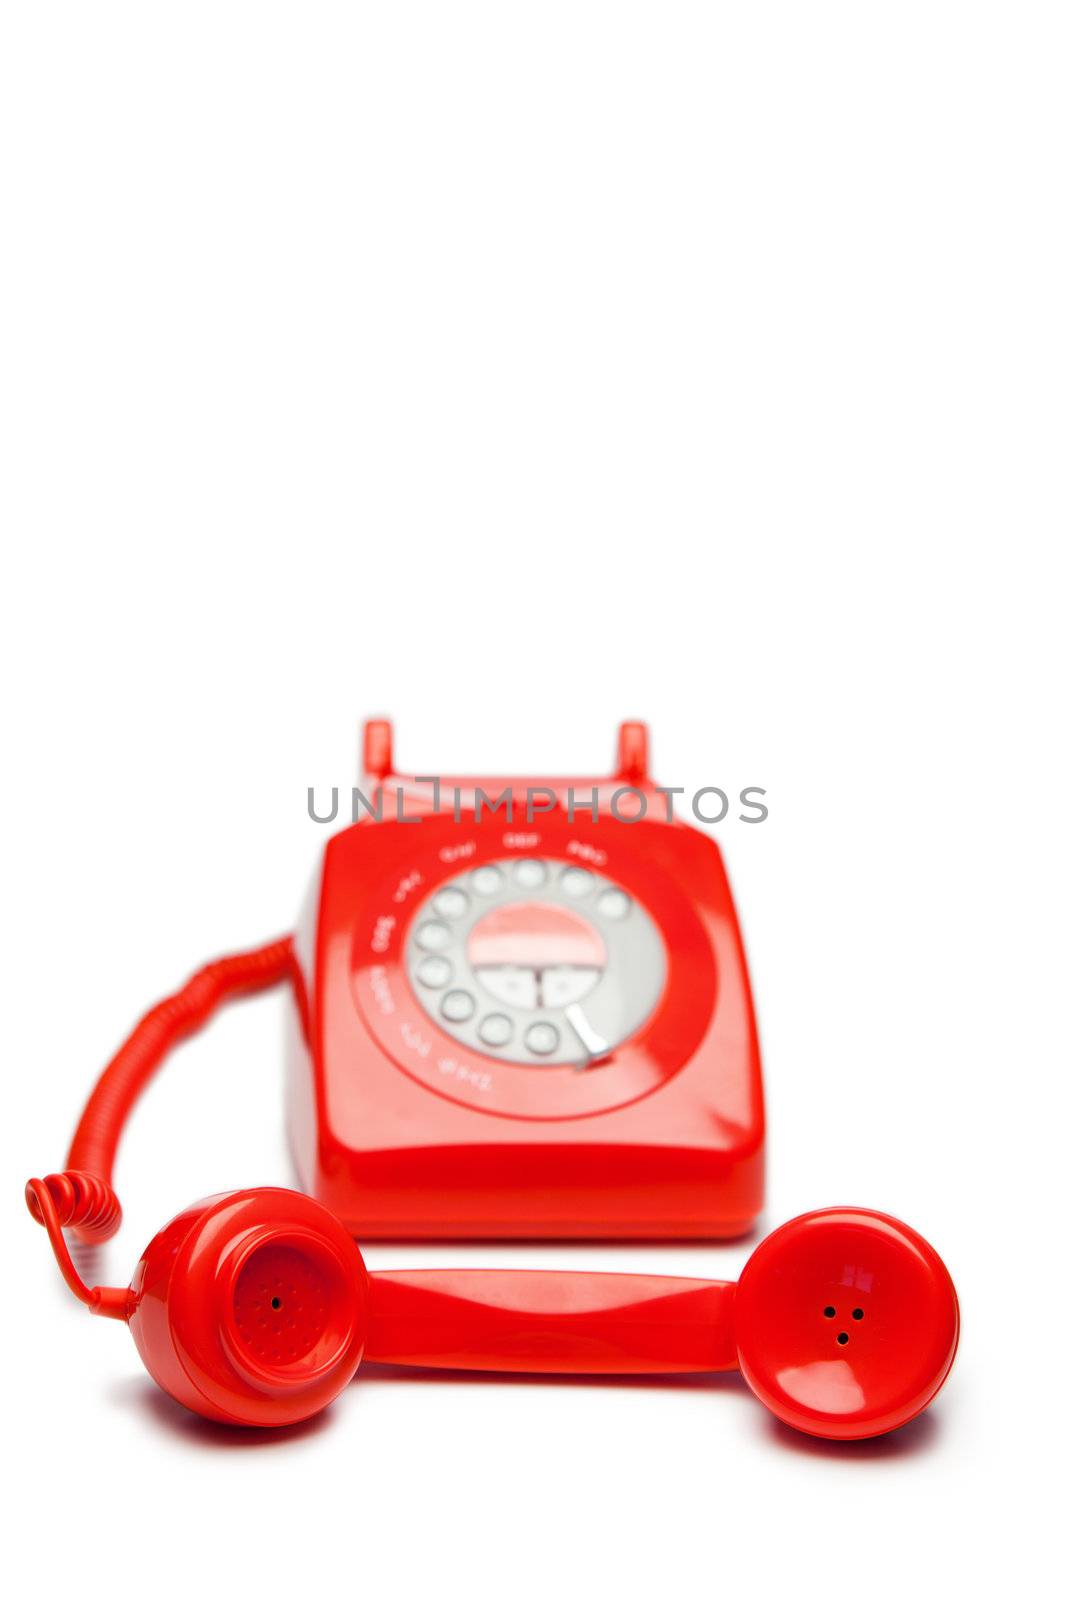 Fashion red telephone on a white background